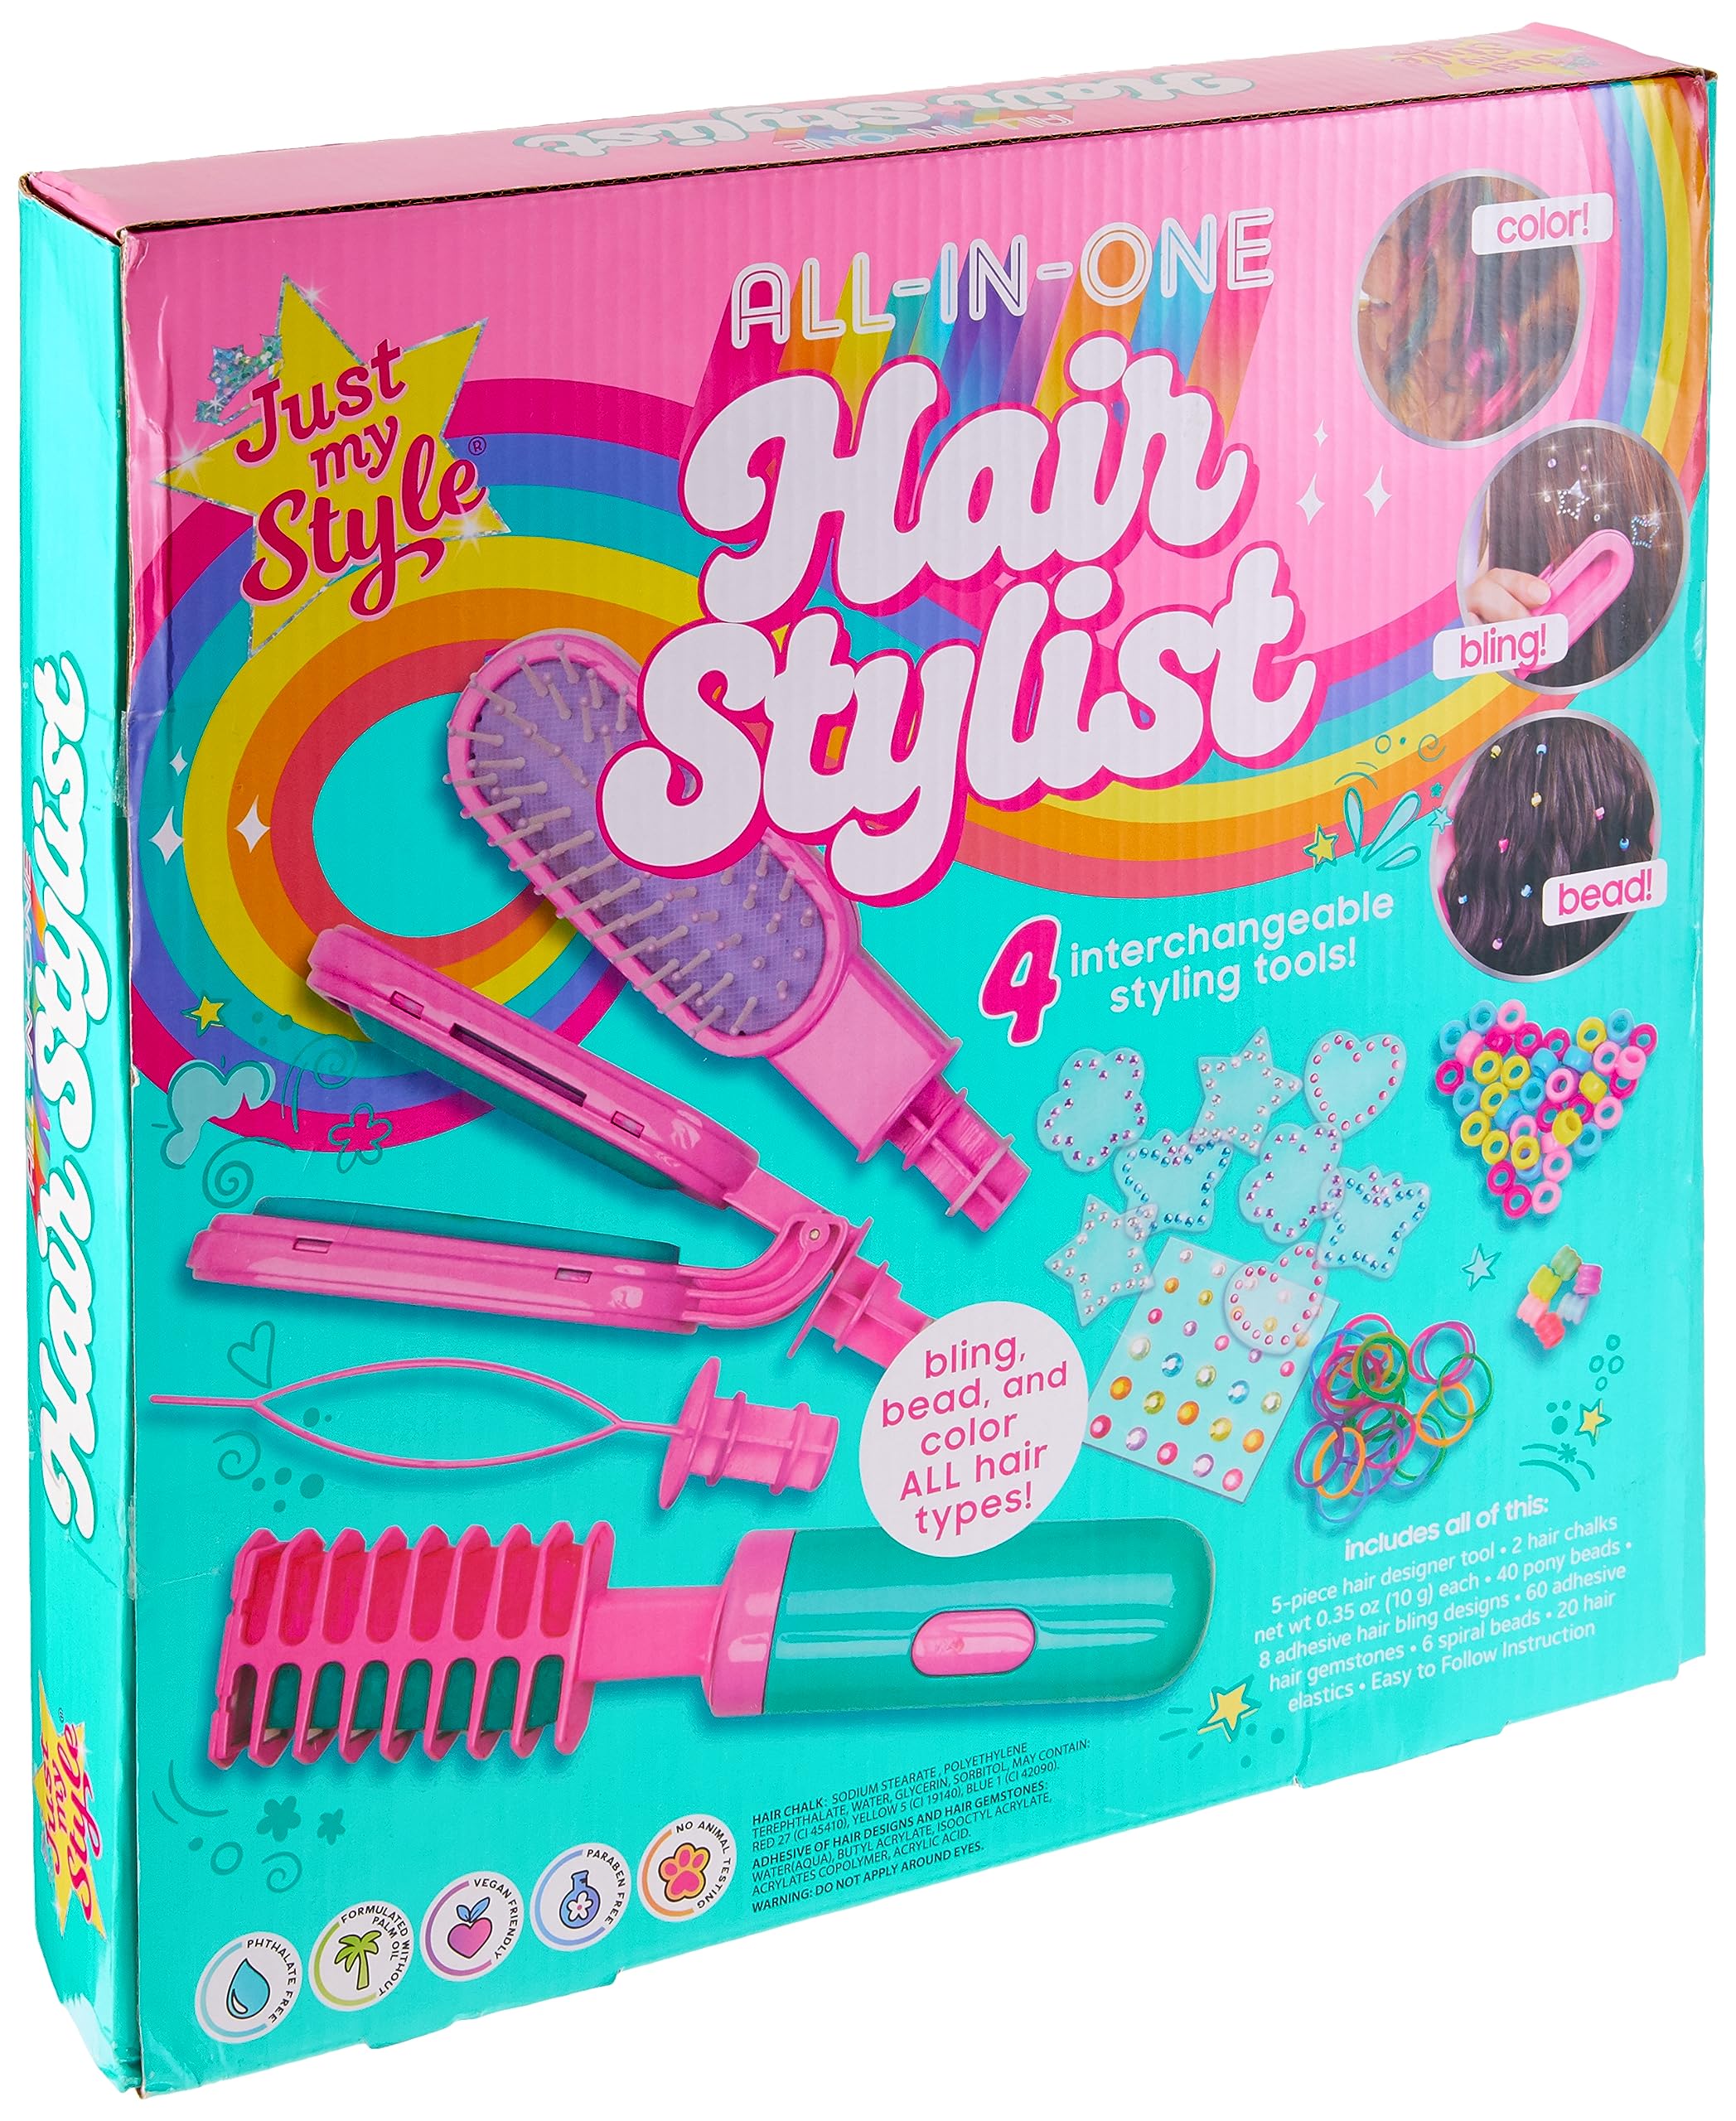 Just My Style All-in-One Hair Stylist, 4-in-1 Hair Styling Tool, Including Hair Gem Stamper, Hair Beader Tool, Hair Chalk, Hair Brush, Fun for Sleepovers & Parties, Hair Accessories for Girls 8-12